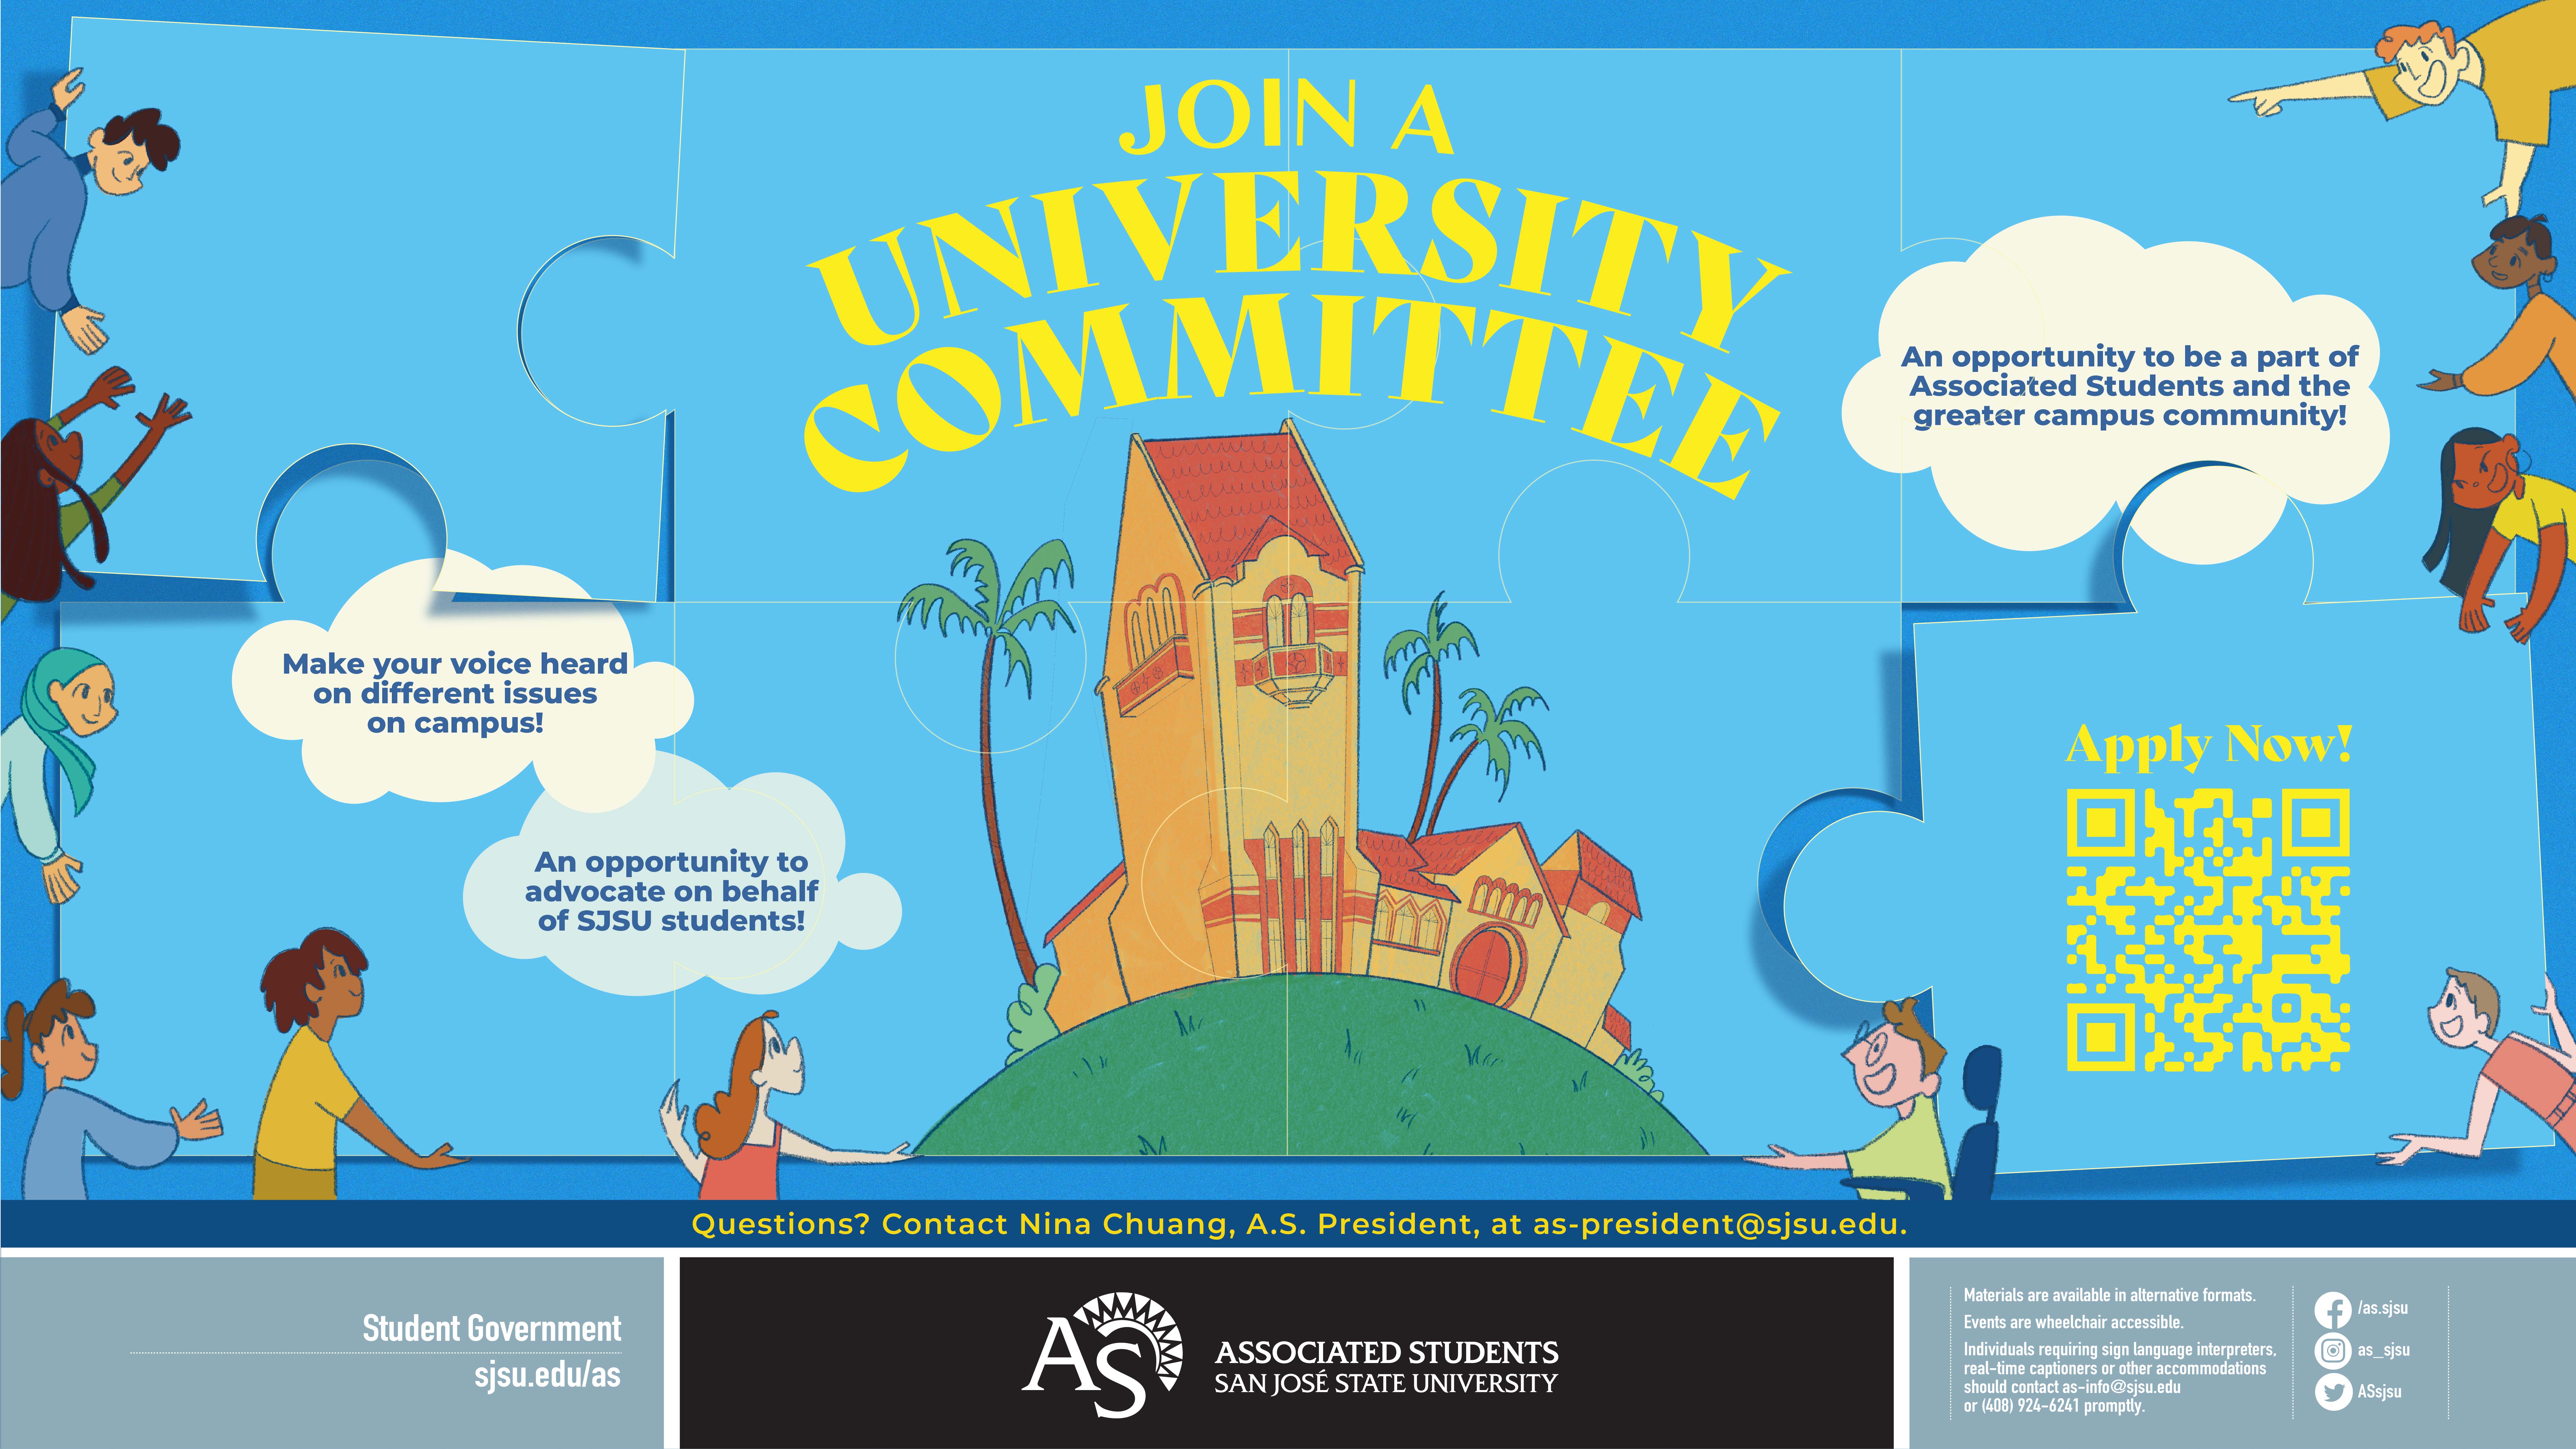 Join A University Committee